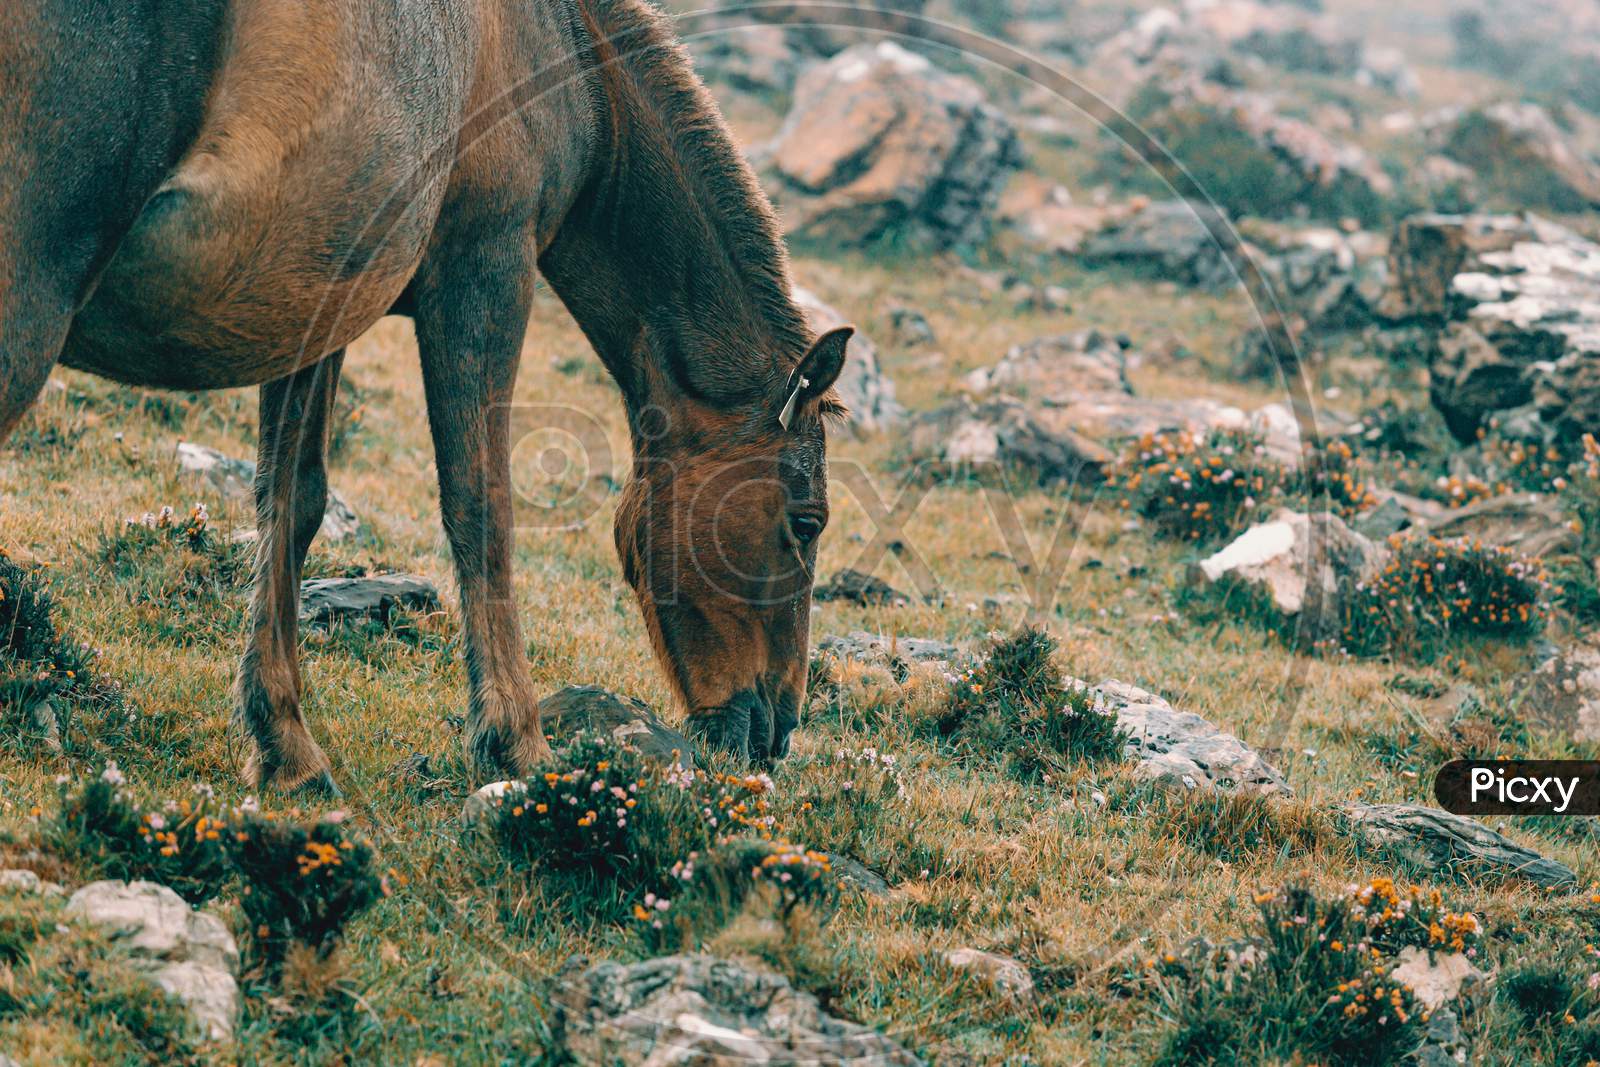 Close Up Of A Brown And Black Wild Horse In The Mountains Eating Grass With A Lot Of Mist